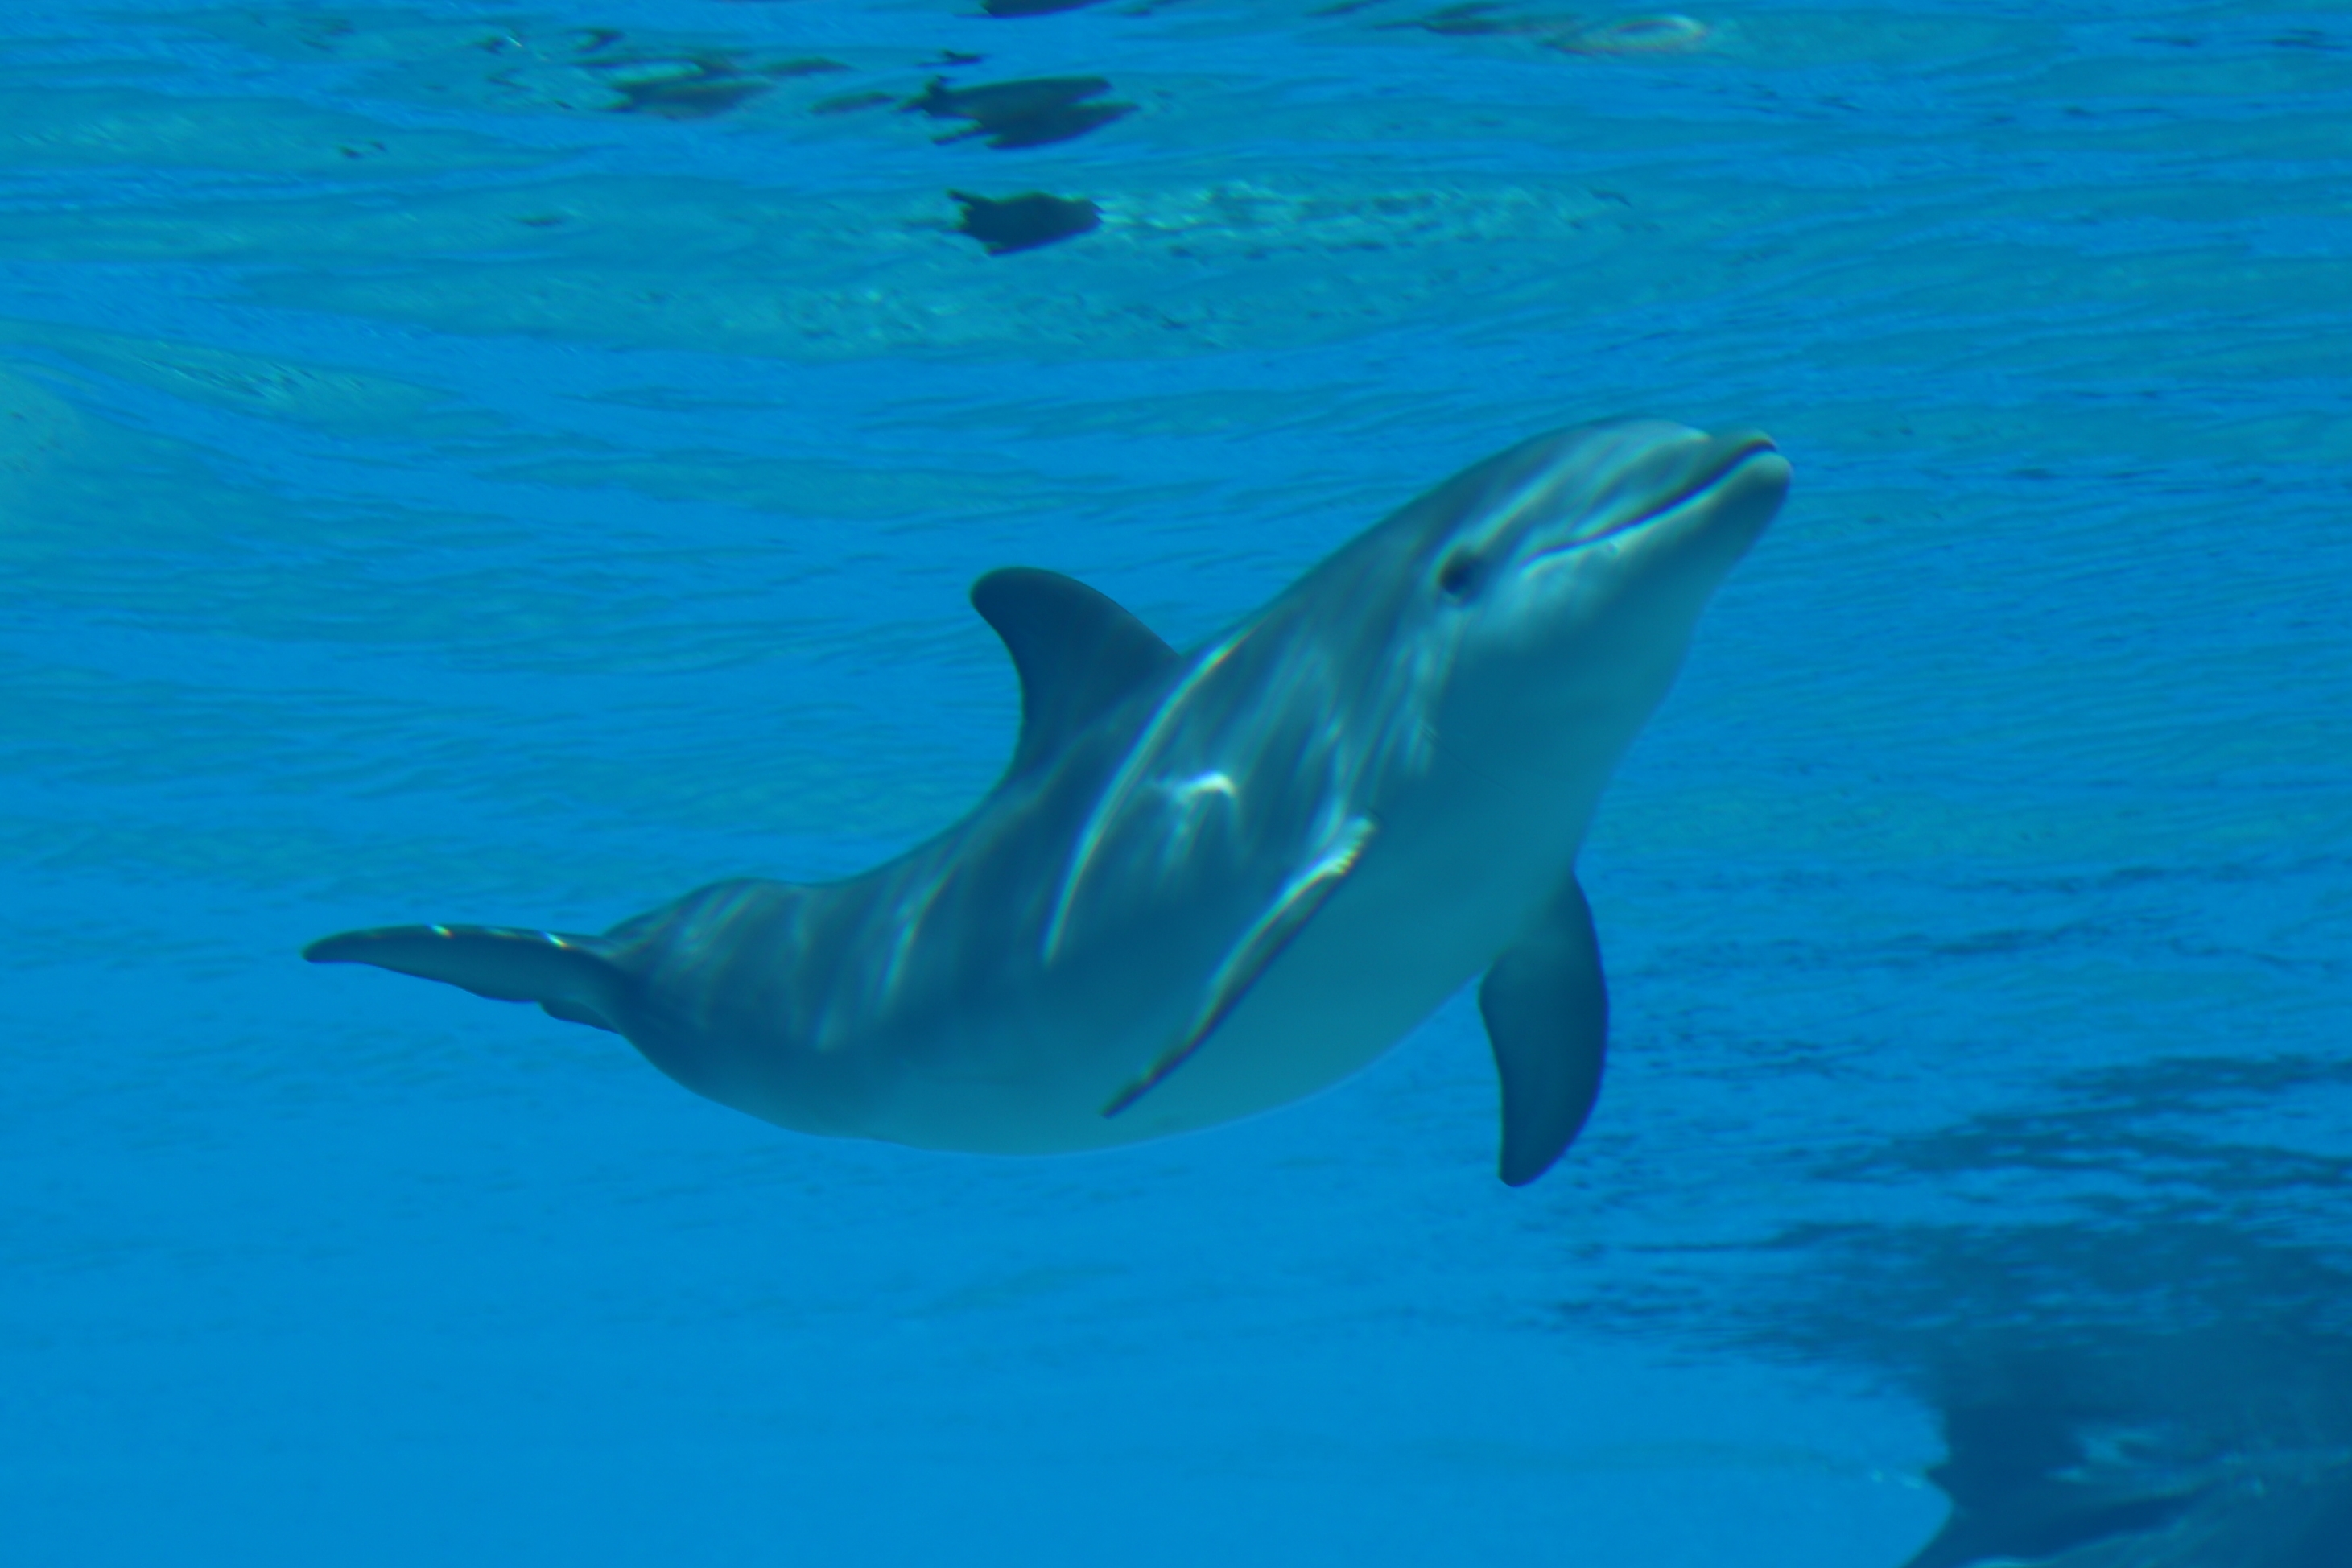 Three Dolphins Die at the Mirage in Six Months, Smart News